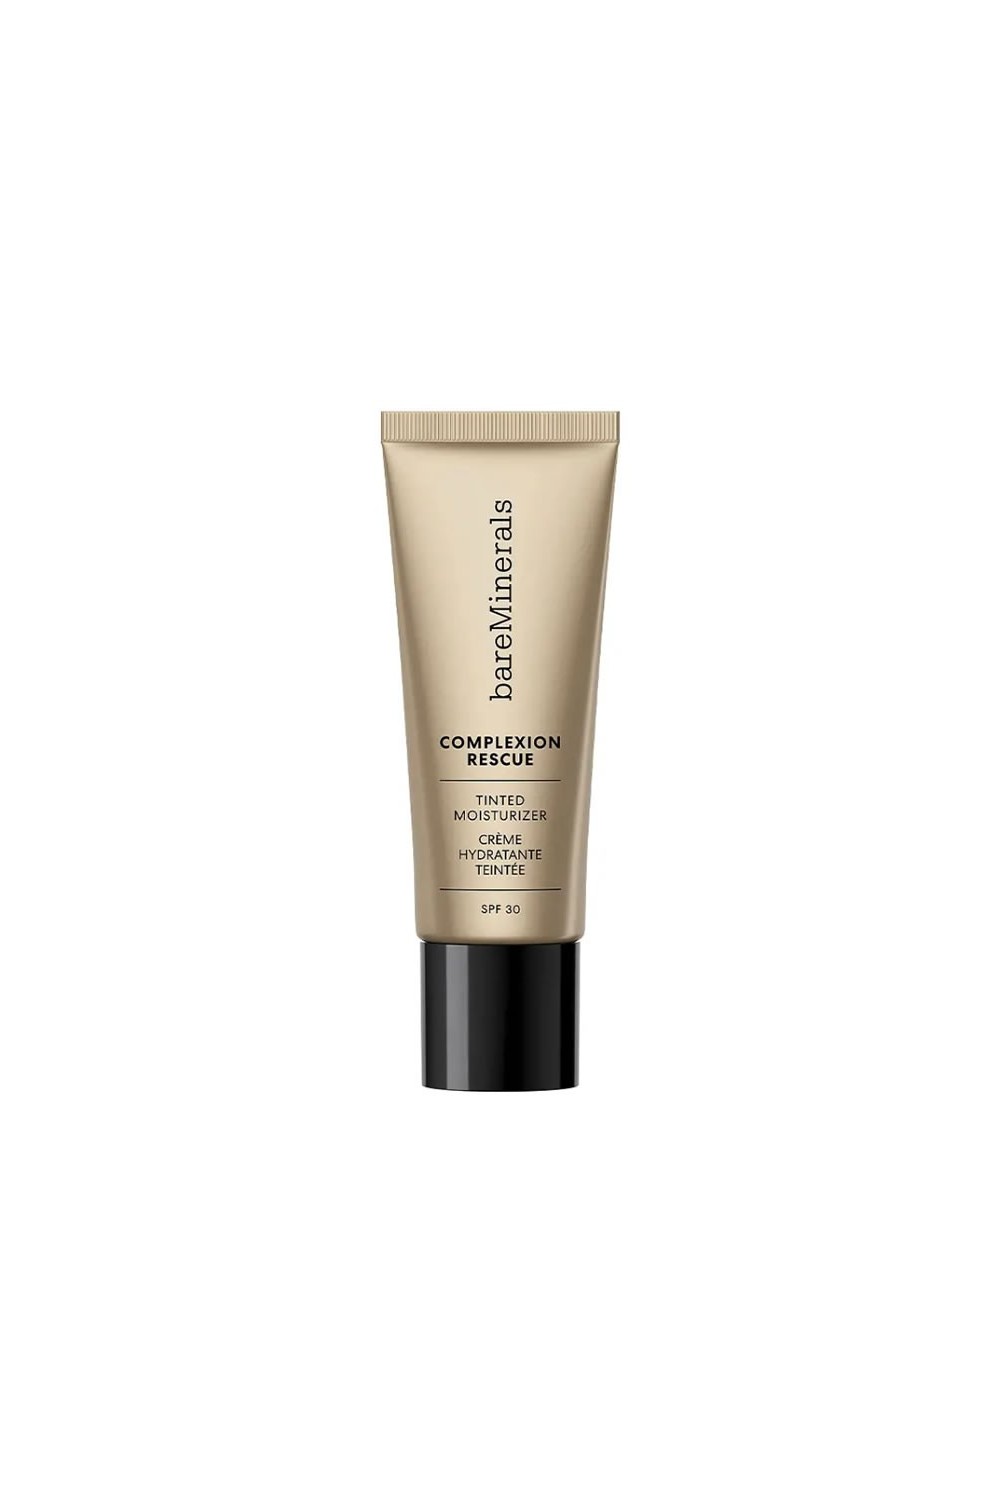 Bareminerals Complexion Rescue Tinted Hydrating Gel Cream Dune Spf30 35ml